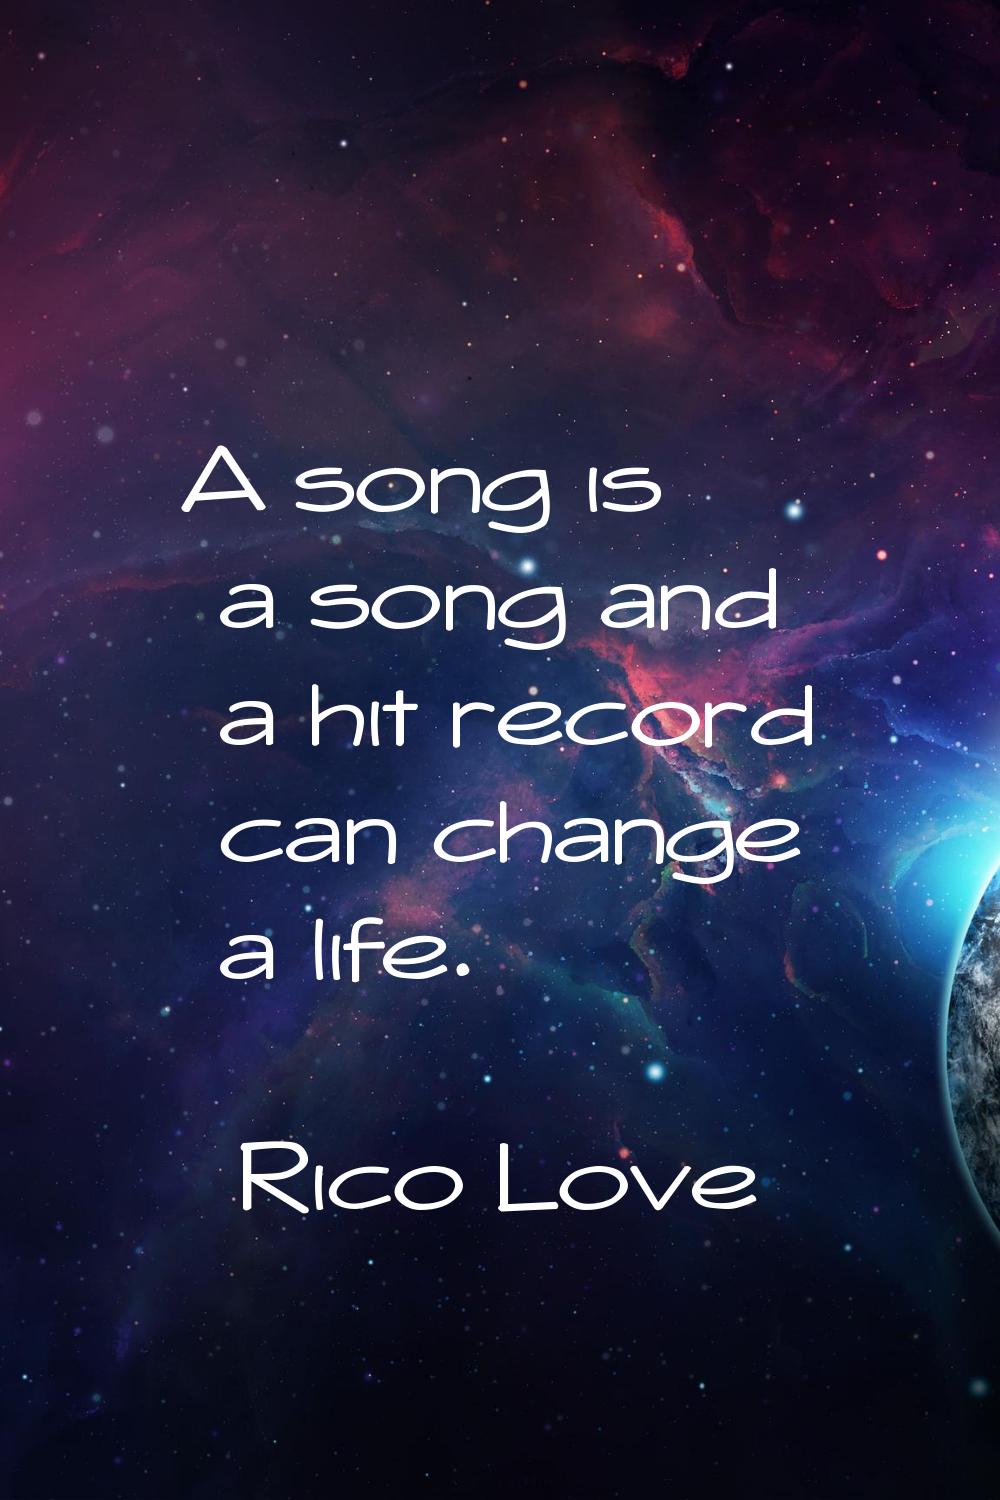 A song is a song and a hit record can change a life.